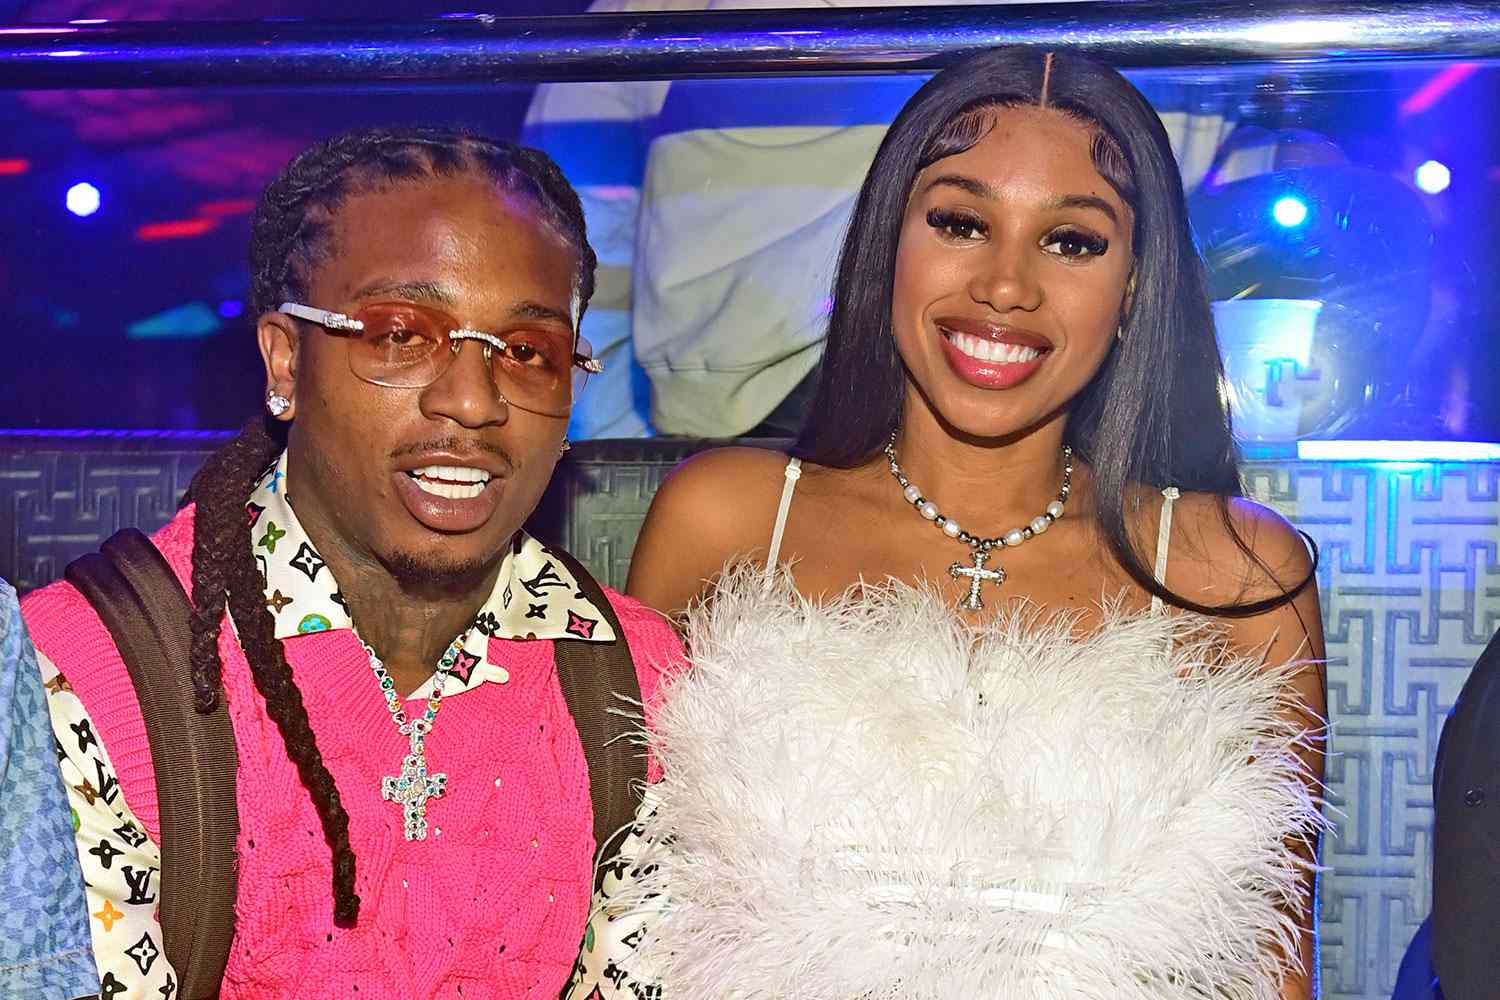 Deion Sanders' Daughter Deiondra Is Engaged to Singer Jacquees After a Baby Shower Surprise Proposal